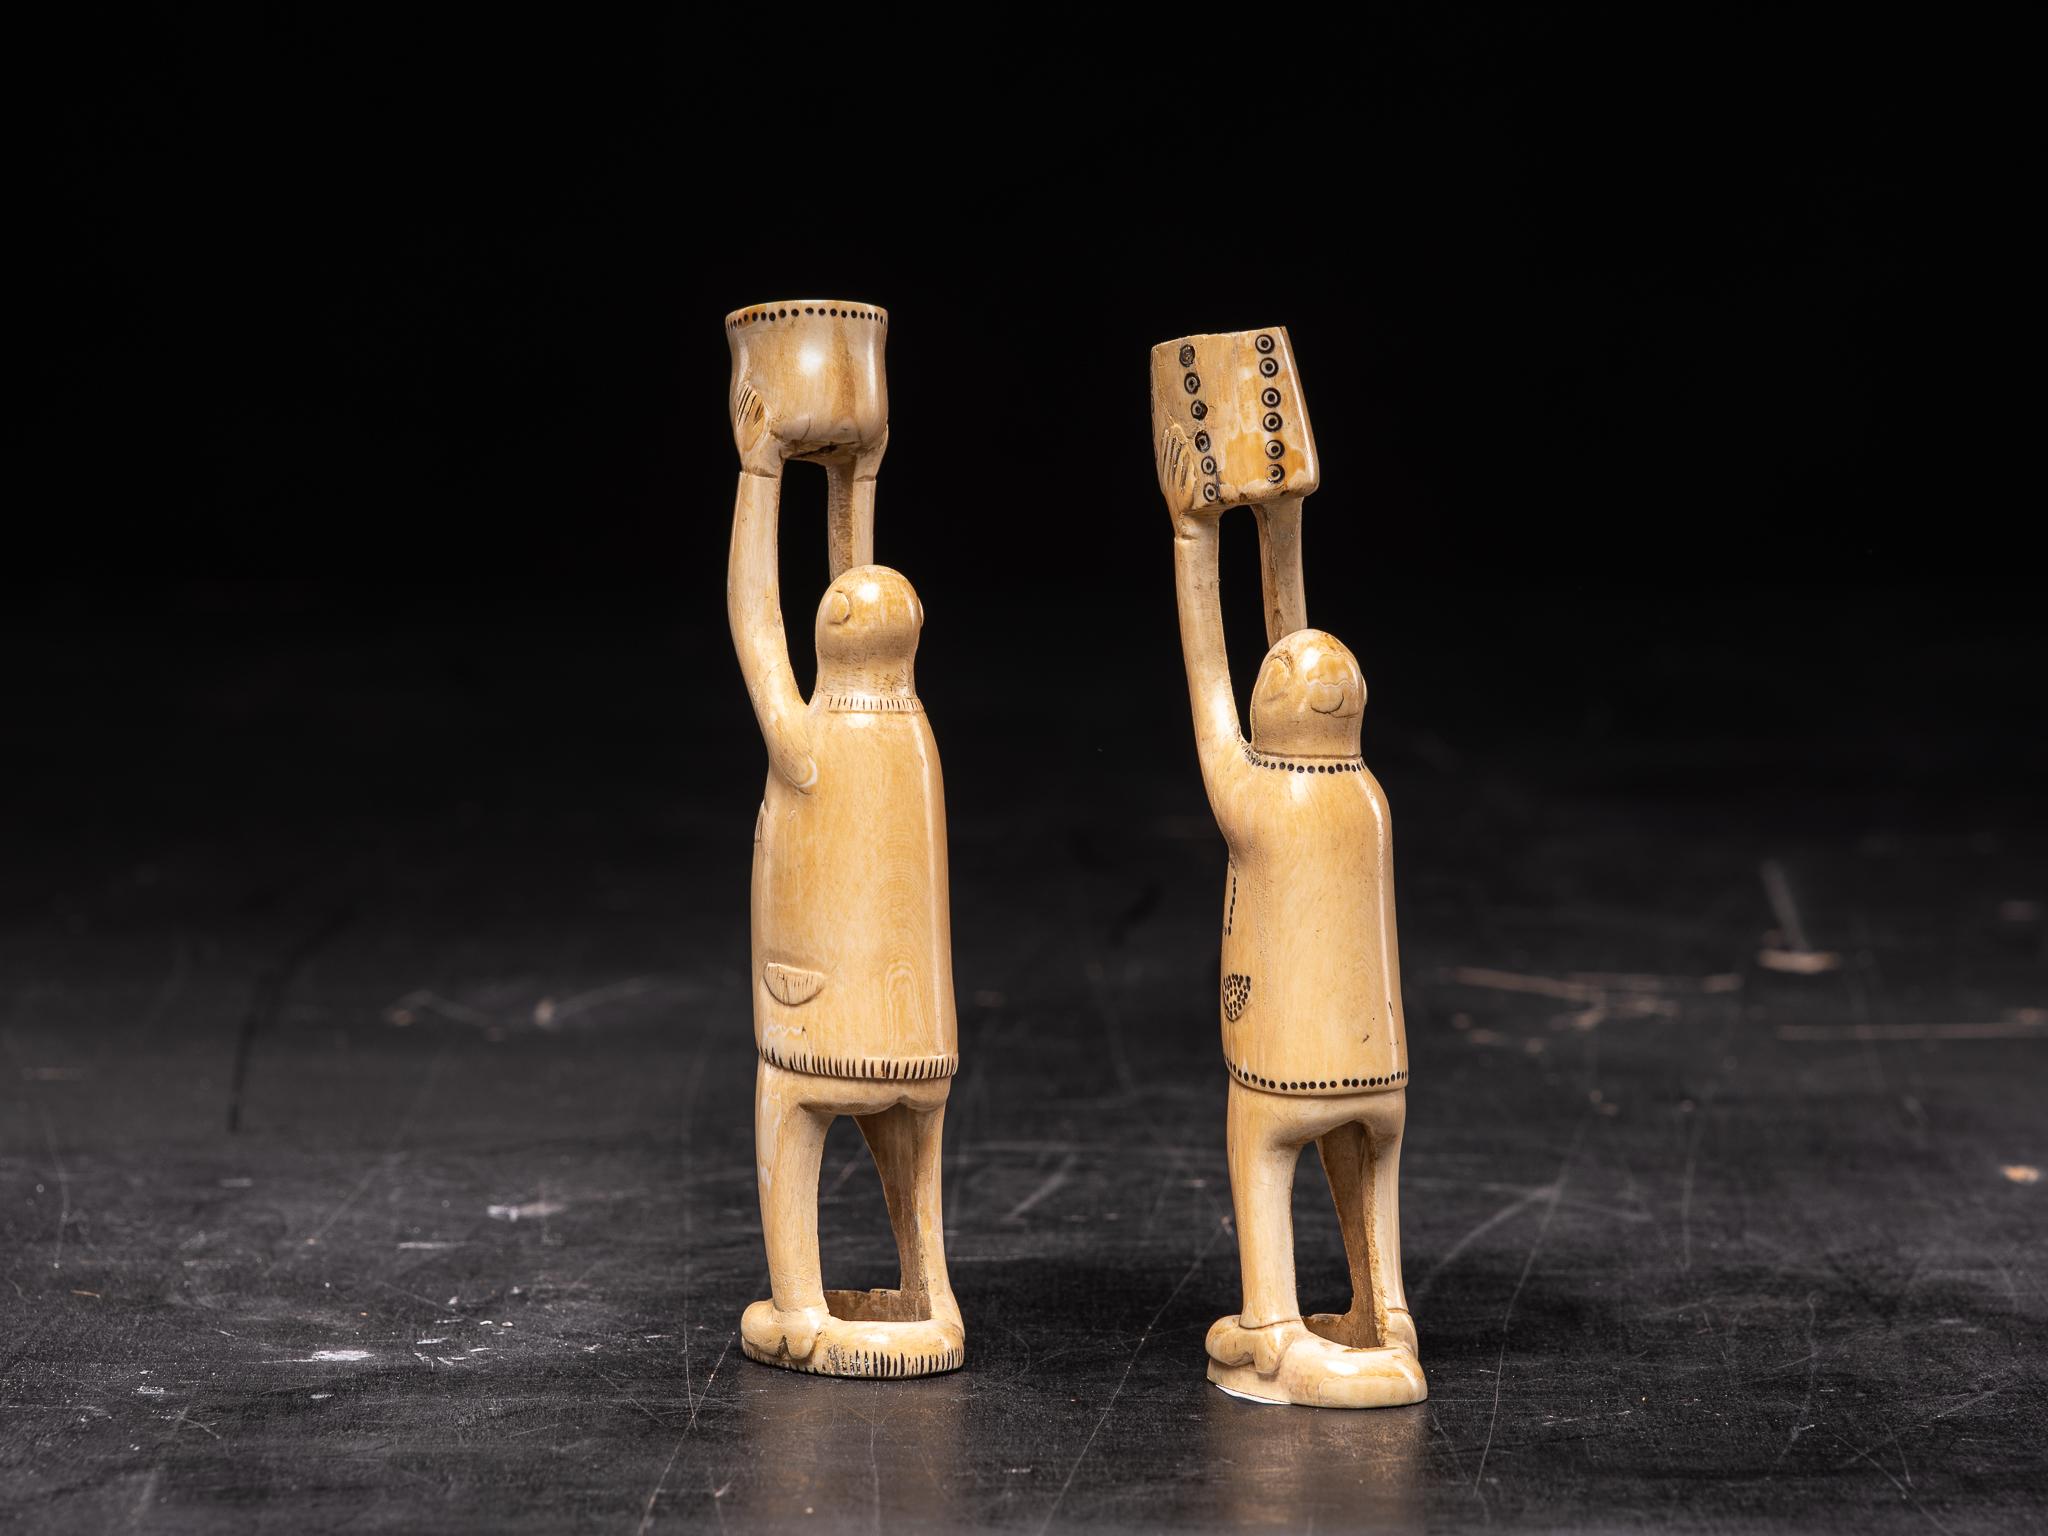 This pair is a fine example of ivory carving done by Inuit natives; Native Americans who live within and just below the Arctic Circle. Each year they procured a substantial amount of ivory from their walrus kills. The raw ivory was usually thrown on